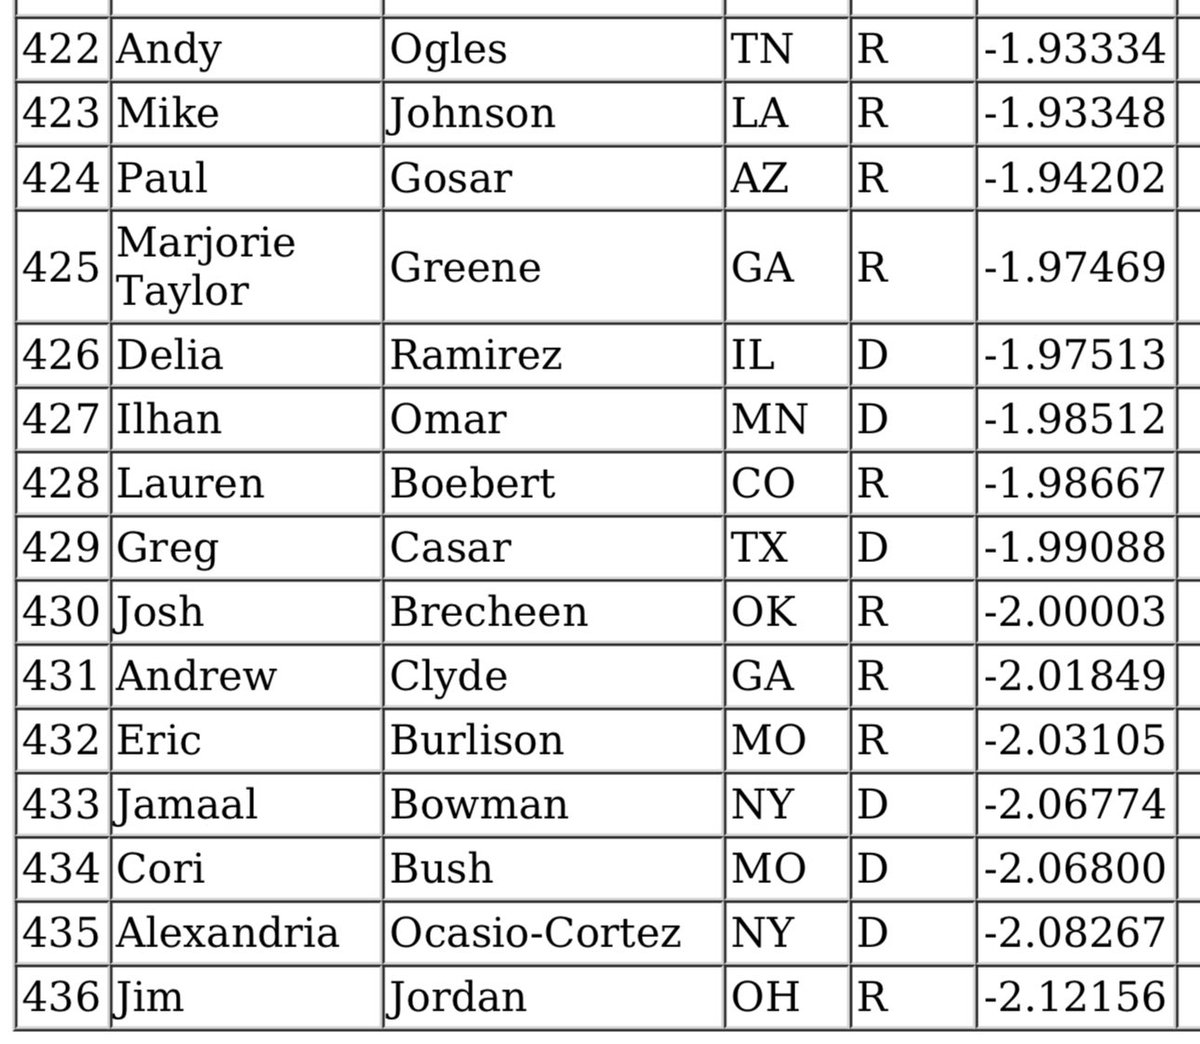 These are the 15 LEAST bi-partisan members of Congress from @TheLugarCenter's annual report. A mix of D's and R's, but many well-known names, because there’s prominence in partisanship & extremism. I will work across the aisle, putting me at the TOP of the list. Not the bottom.